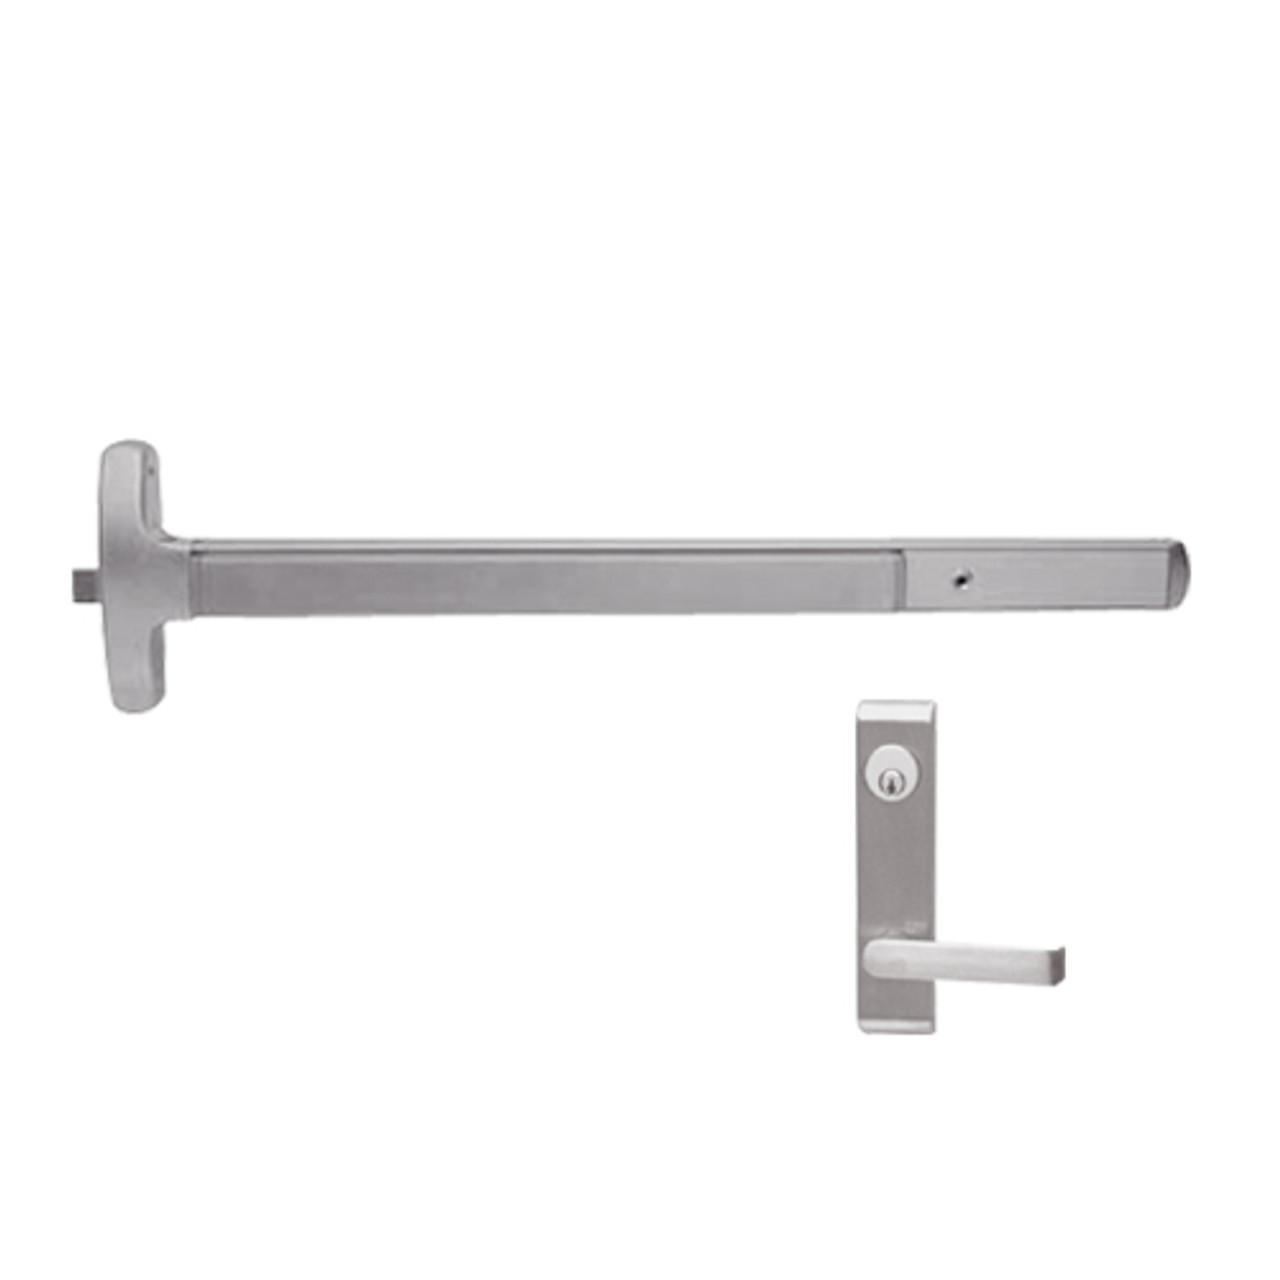 24-R-L-NL-DANE-US32D-3-LHR Falcon Exit Device in Satin Stainless Steel